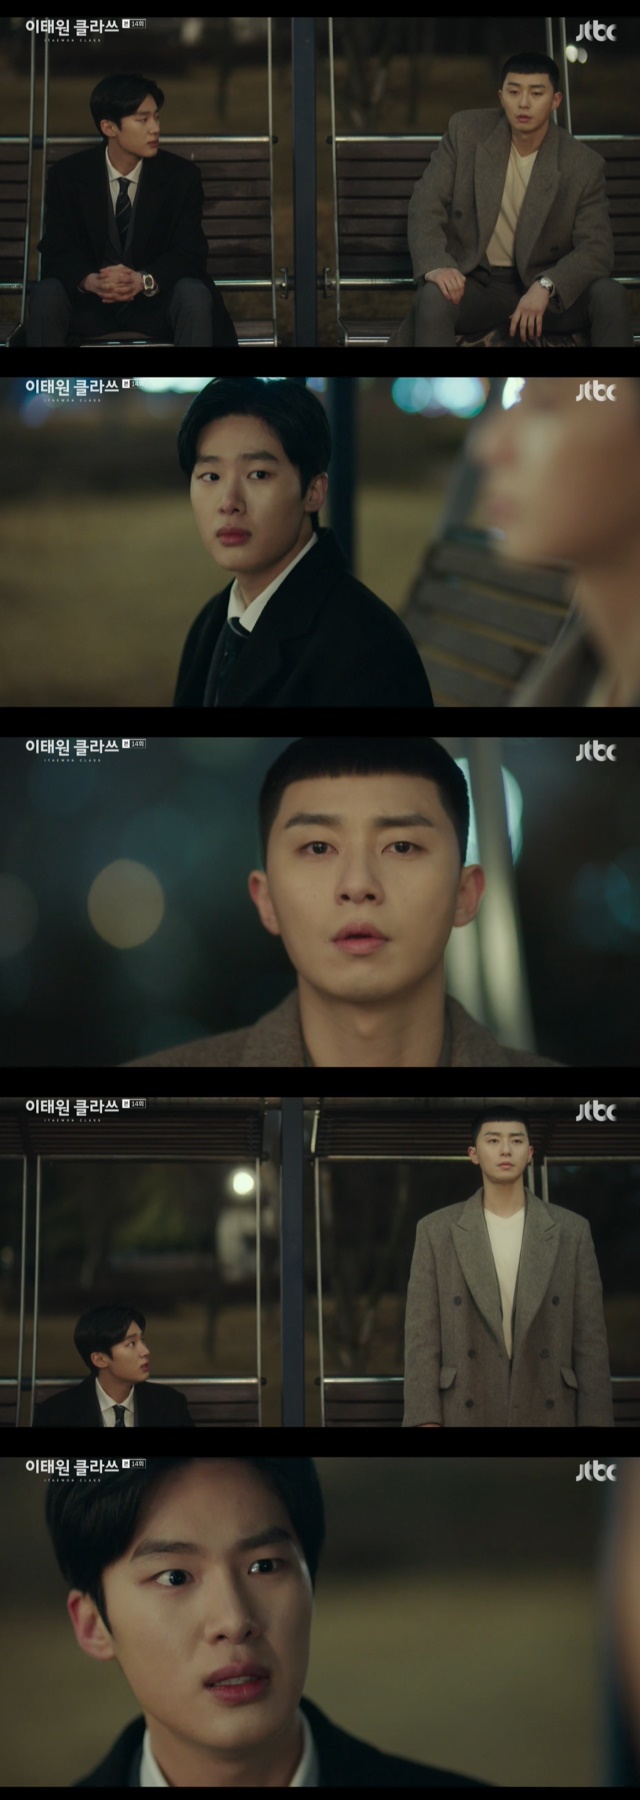 Park Seo-joon confided in Kim Dong-hees heart toward Kim Dami.In the 14th episode of JTBCs gilt drama Itaewon Klath (playplayed by Cho Kwang-jin/directed by Kim Sung-yoon), which aired on March 14, Park Seo-joon met with Knotweed water (played by Kim Dong-hee), who visited Joe-yool Lee (played by Kim Dae-mi).Roy, who came running to the hospital after realizing his love for Joe-yool Lee, confronted Knotweed water there.Do you still like Seo-yool Lee a lot? Park asked Knotweed Water, who had run to the hospital after seeing the article.Ive been thinking four years and a day, you know? Why Im out of the night. Why I want to take the long house.All of them are Seo-yool Lee Lee Ha-na